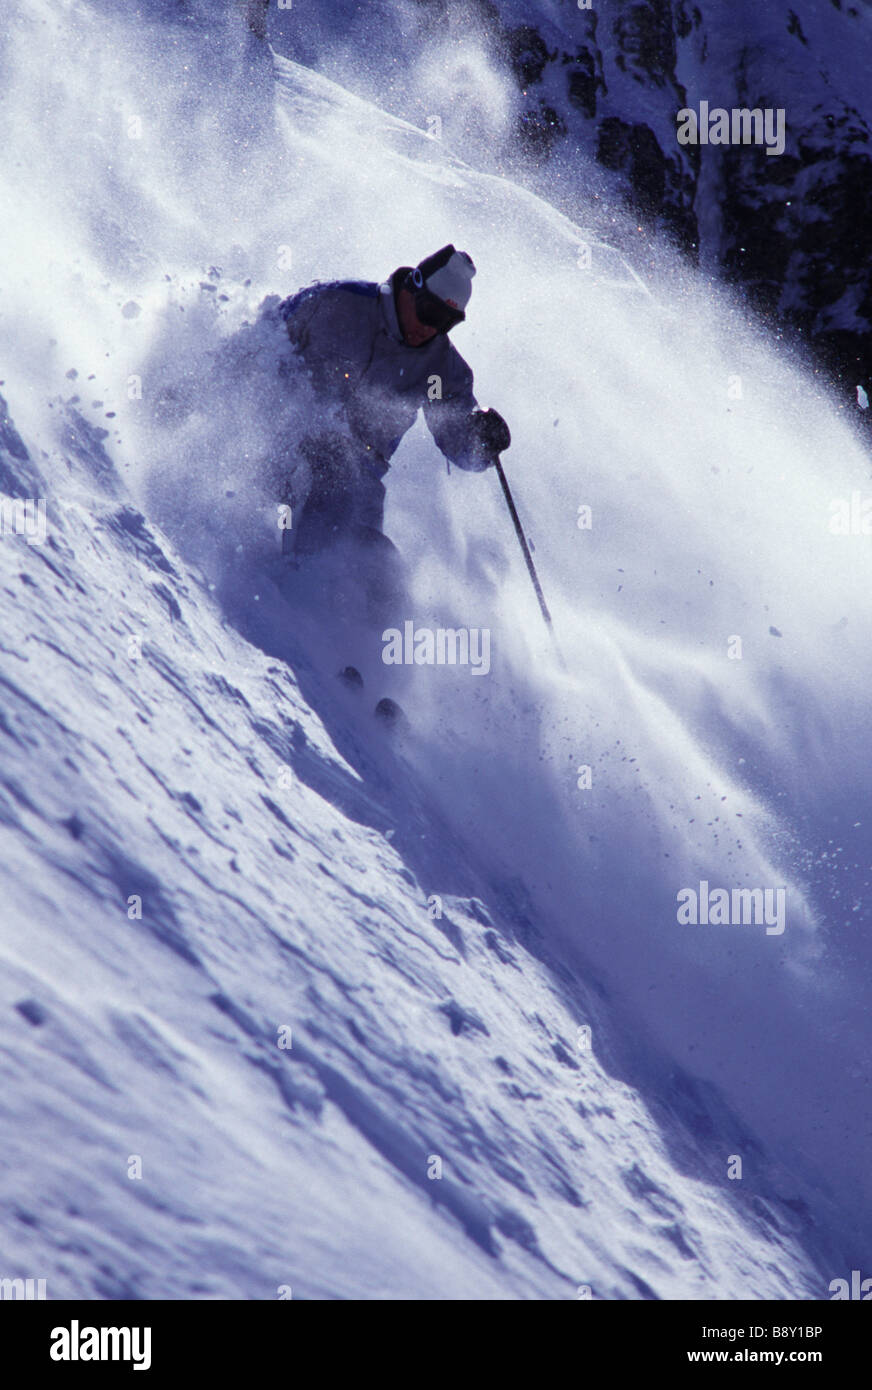 Low angle view of a man skiing on powder snow, Squaw Valley, Fresno County, California, USA Stock Photo